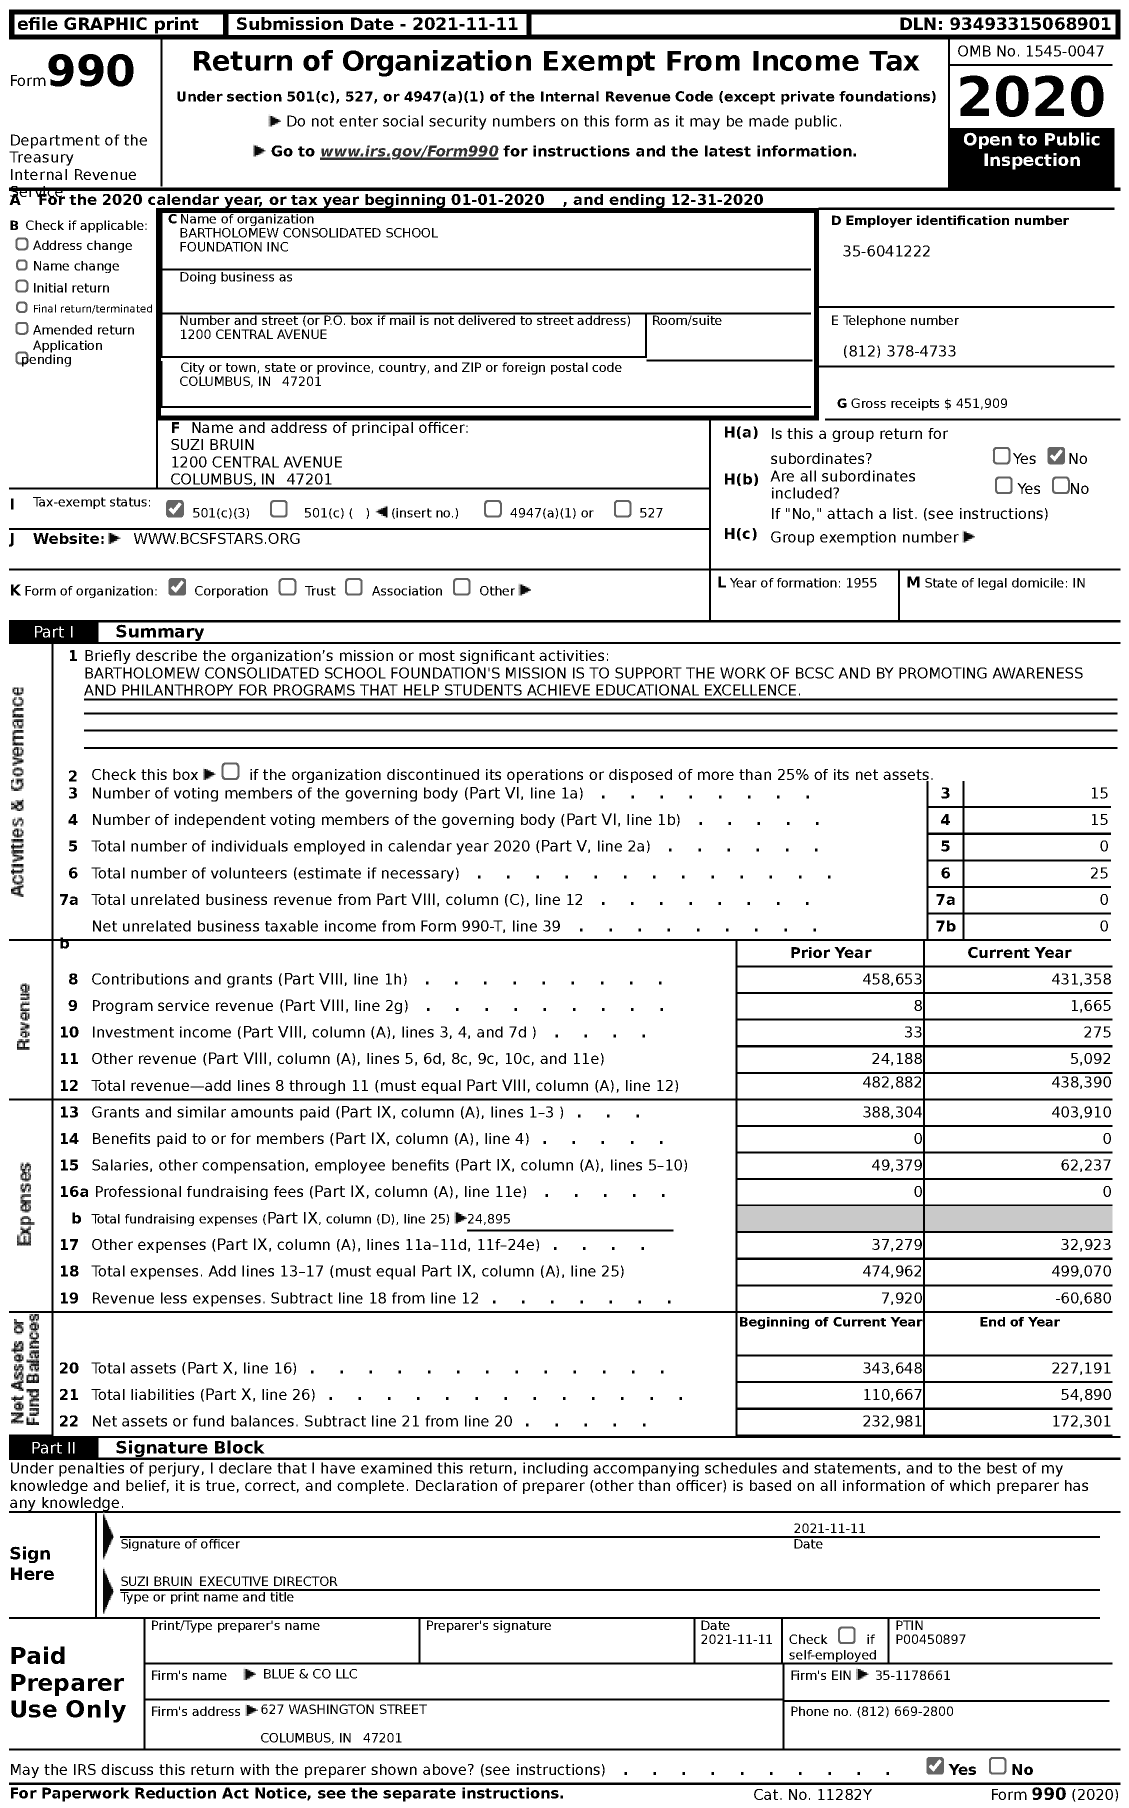 Image of first page of 2020 Form 990 for Bartholomew Consolidated School Foundation